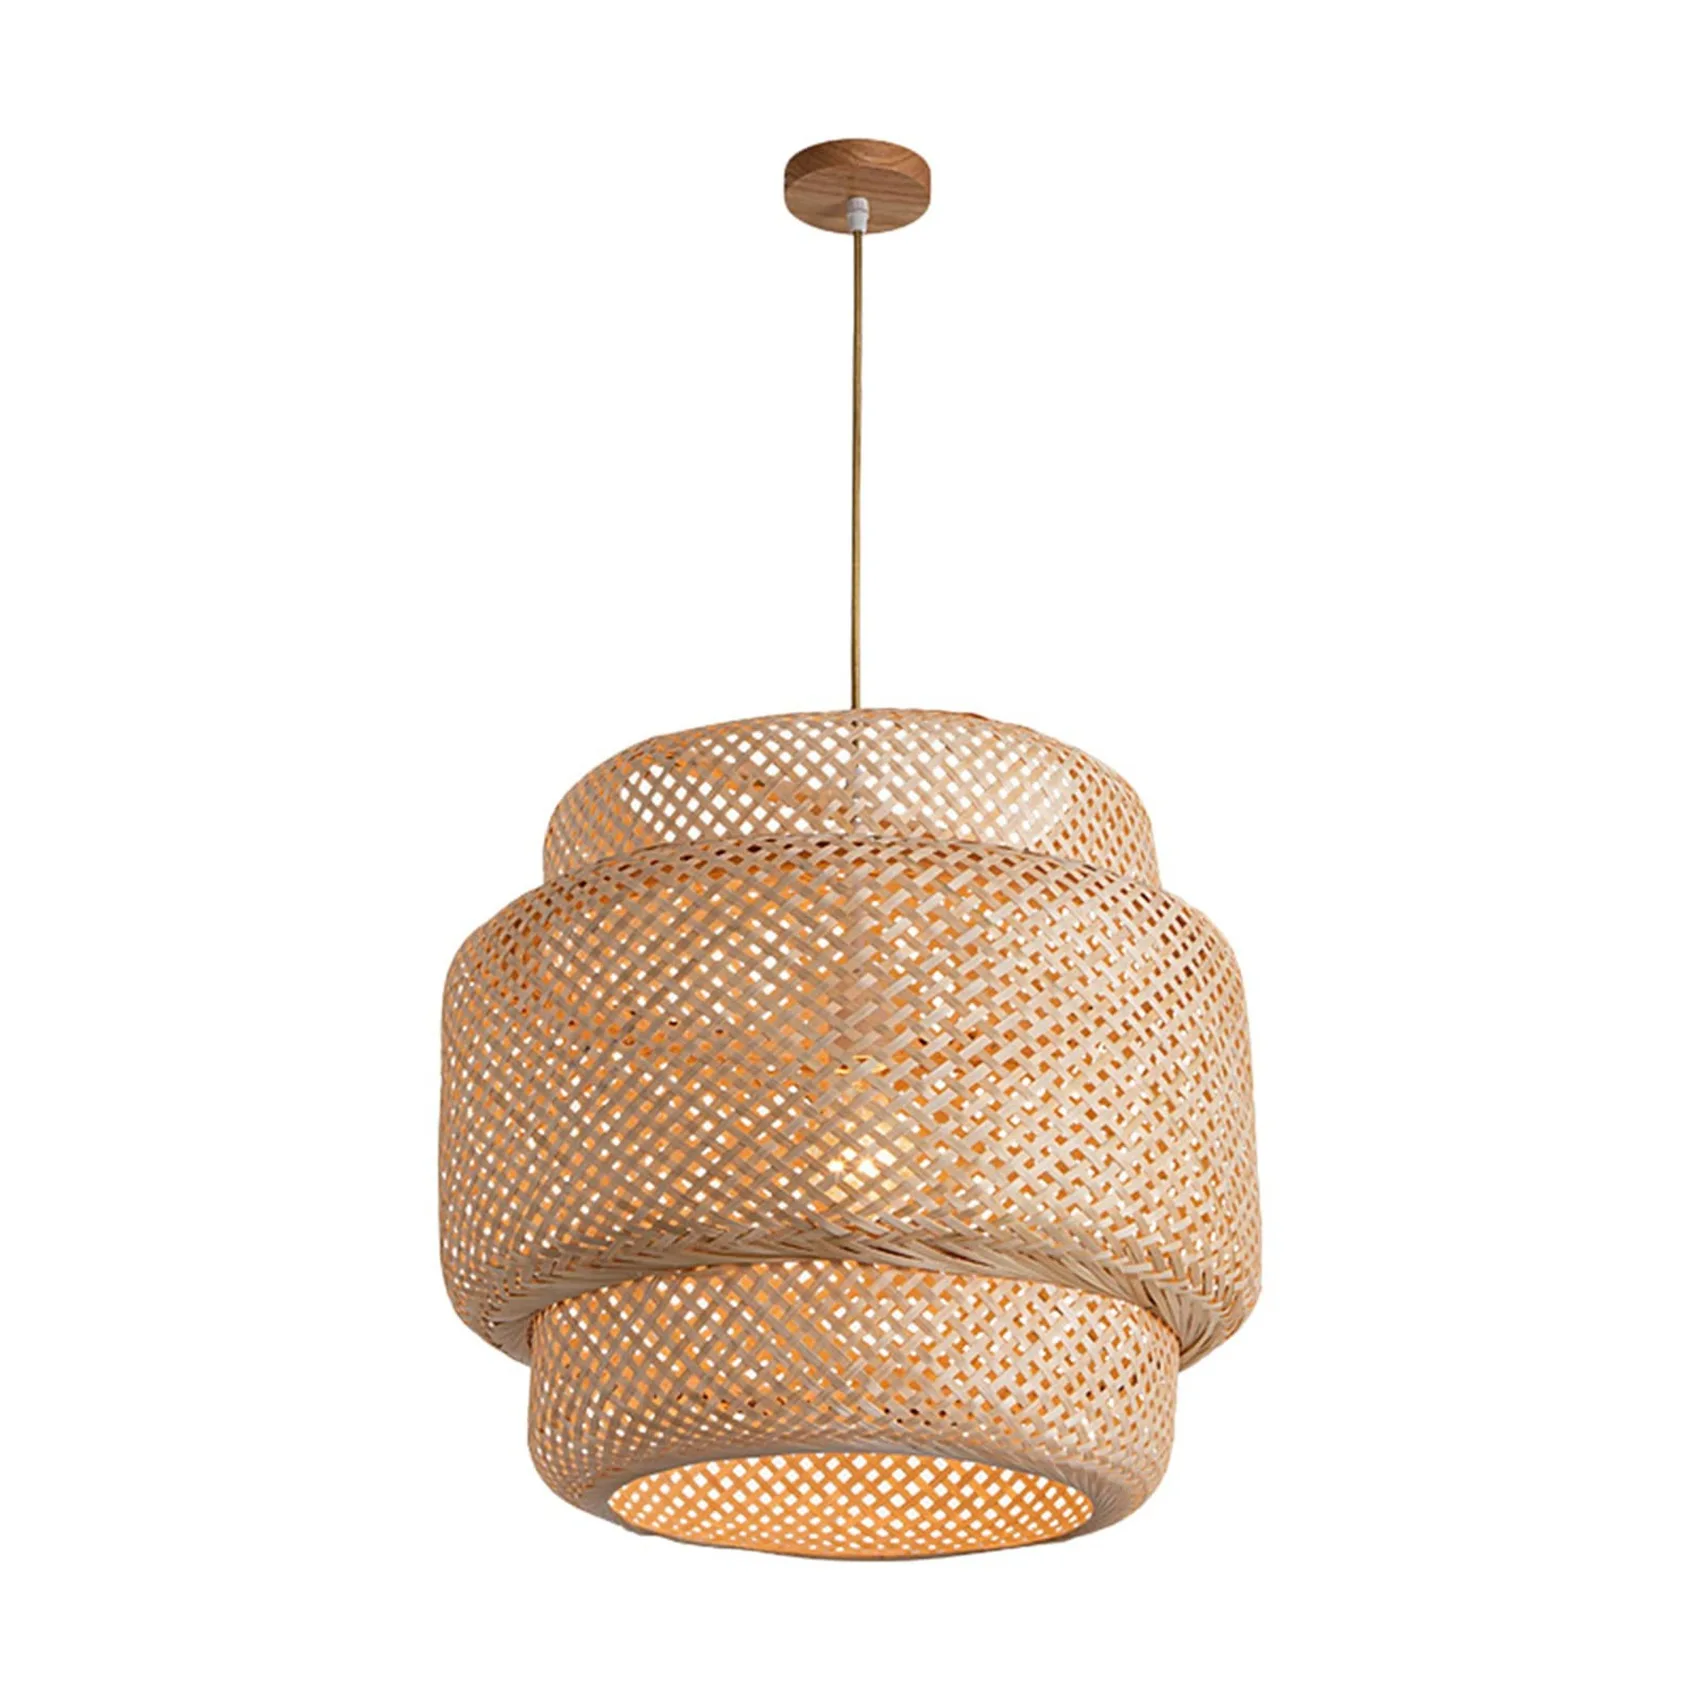 

Pendant Light Ceiling Retro Hanging Cafe Lights Loft Japanese Style Hand Weaved Bamboo Woven Lampshade for Teahouse B